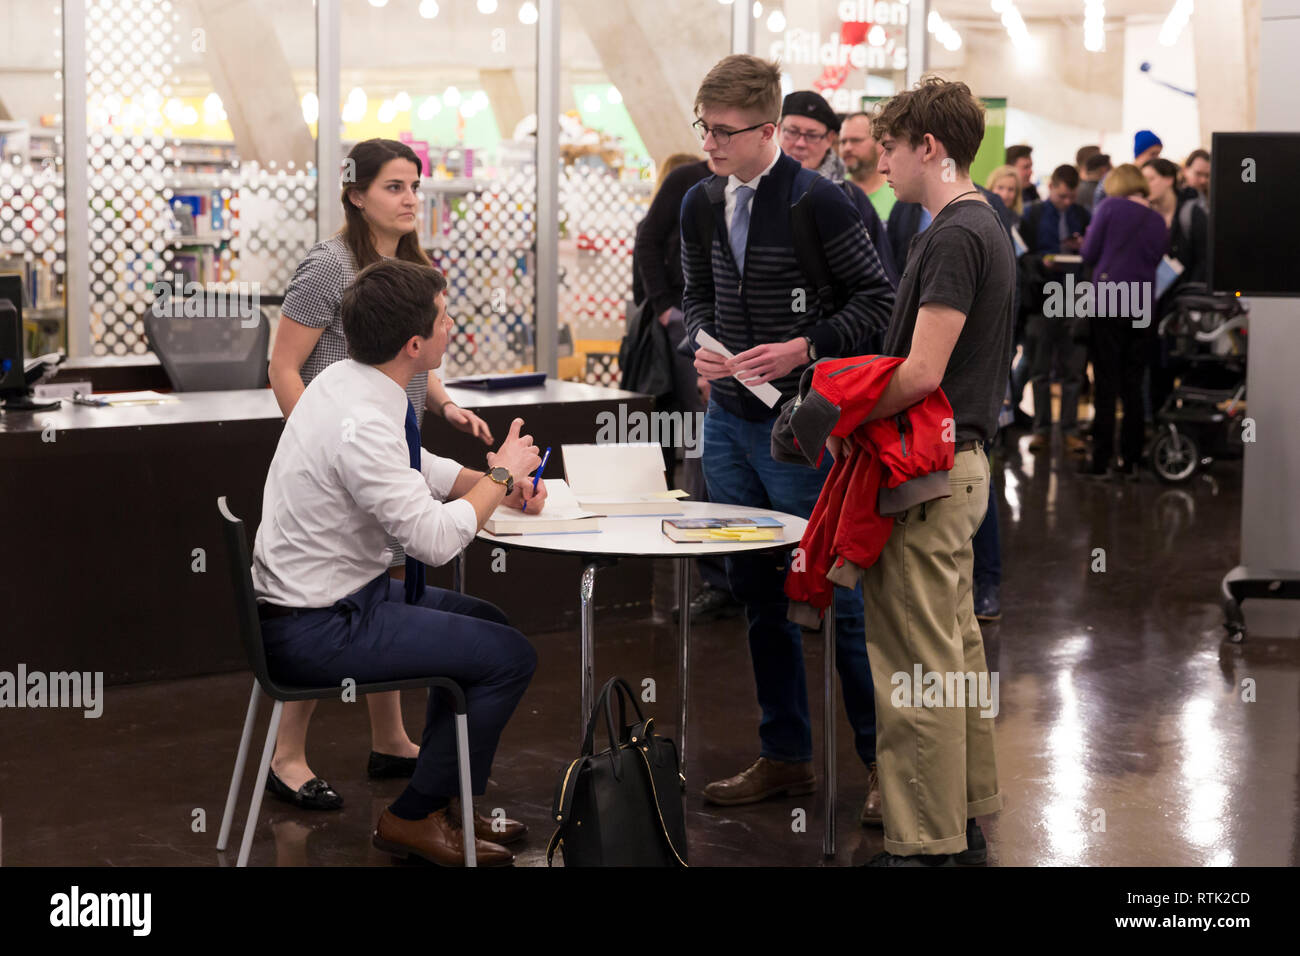 Seattle, Washington DC, USA. 28th Feb 2019. South Bend Indiana Mayor and 2020 presidential candidate Pete Buttigieg signs copies of his biography 'Shortest Way Home' at the Seattle Central Library. Credit: Paul Christian Gordon/Alamy Live News Stock Photo